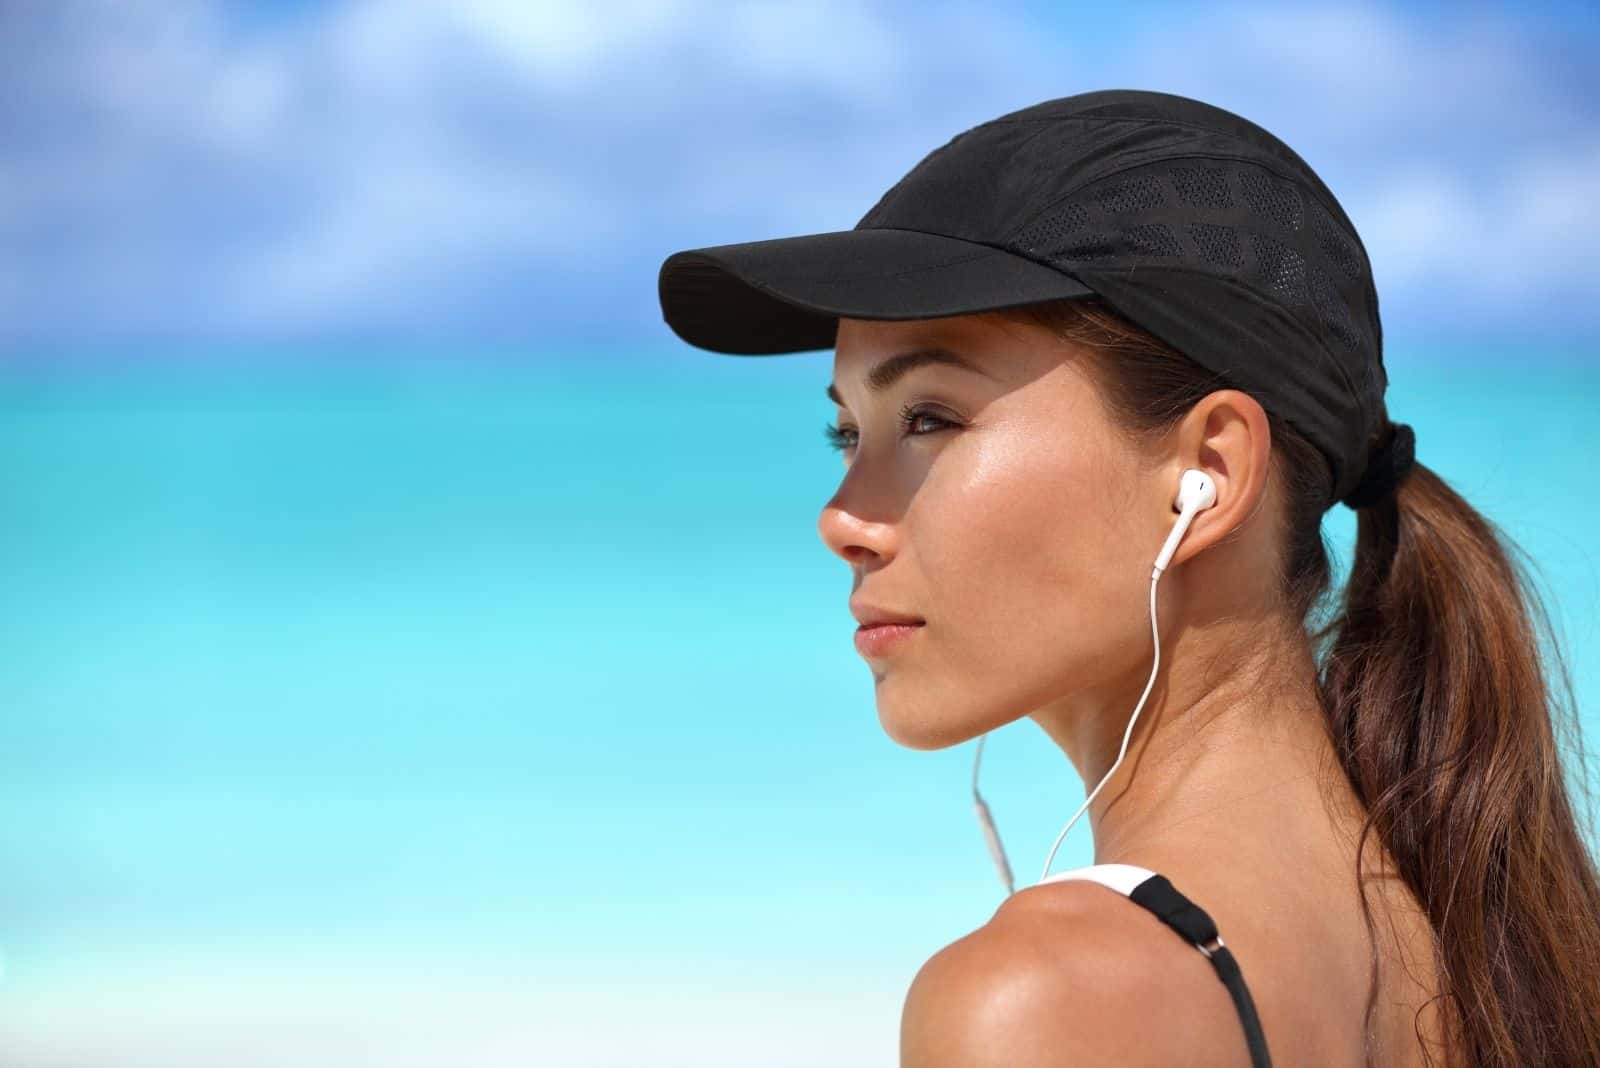 fitness runner girl listening to music with her earphones wearing a cap outdoors in focus photography